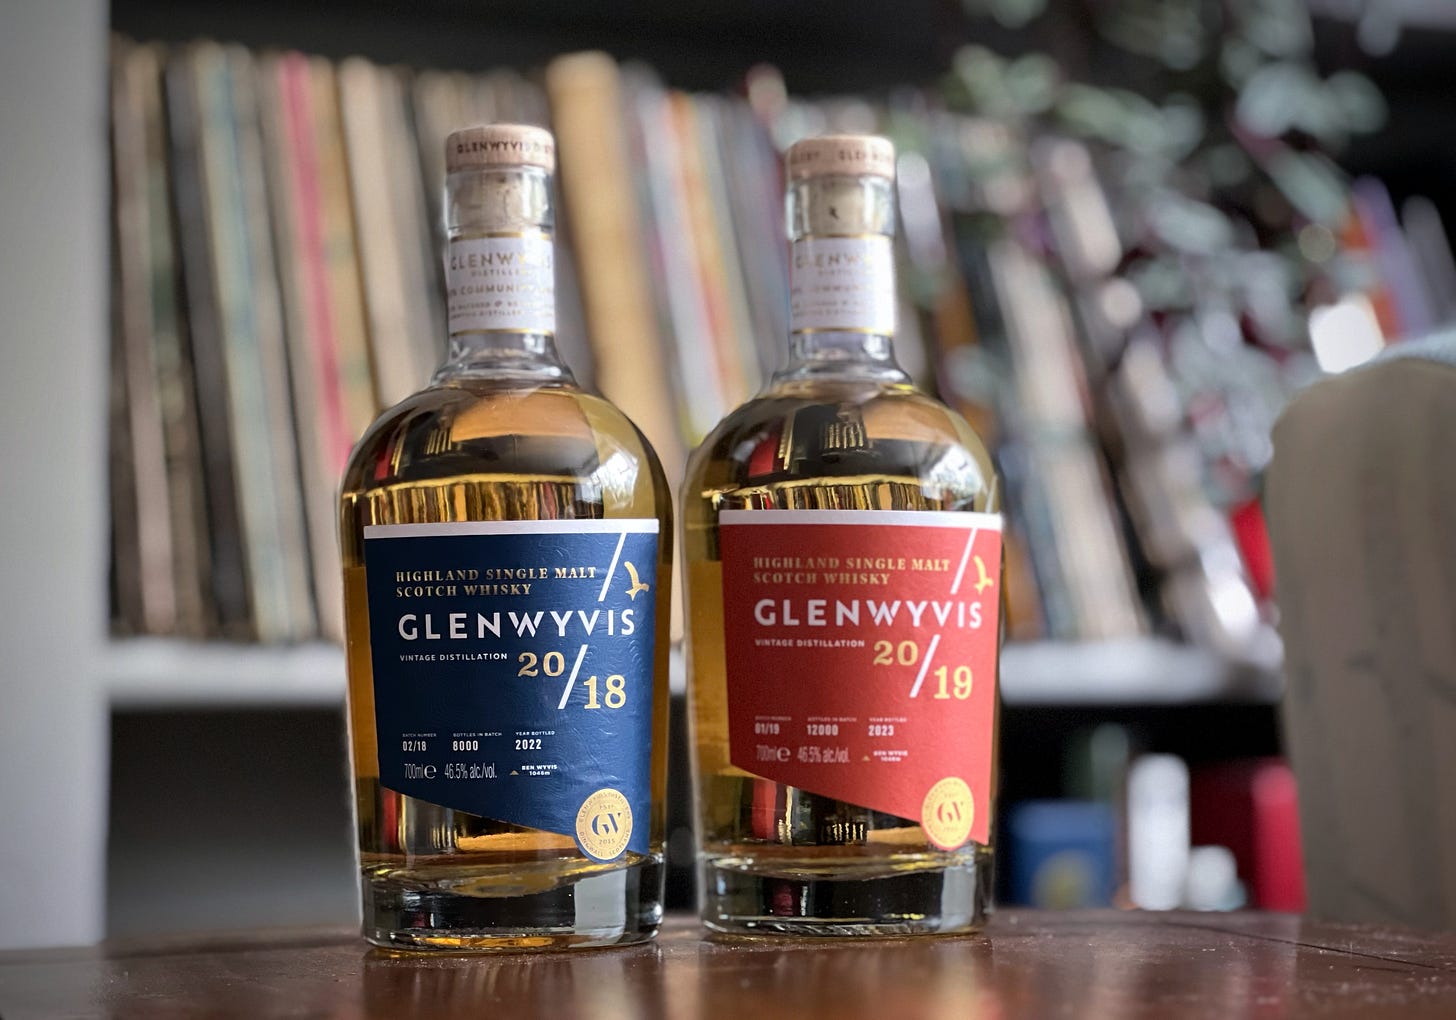 Two bottles of Glenwyvis whisky, the 2018 and the 2019